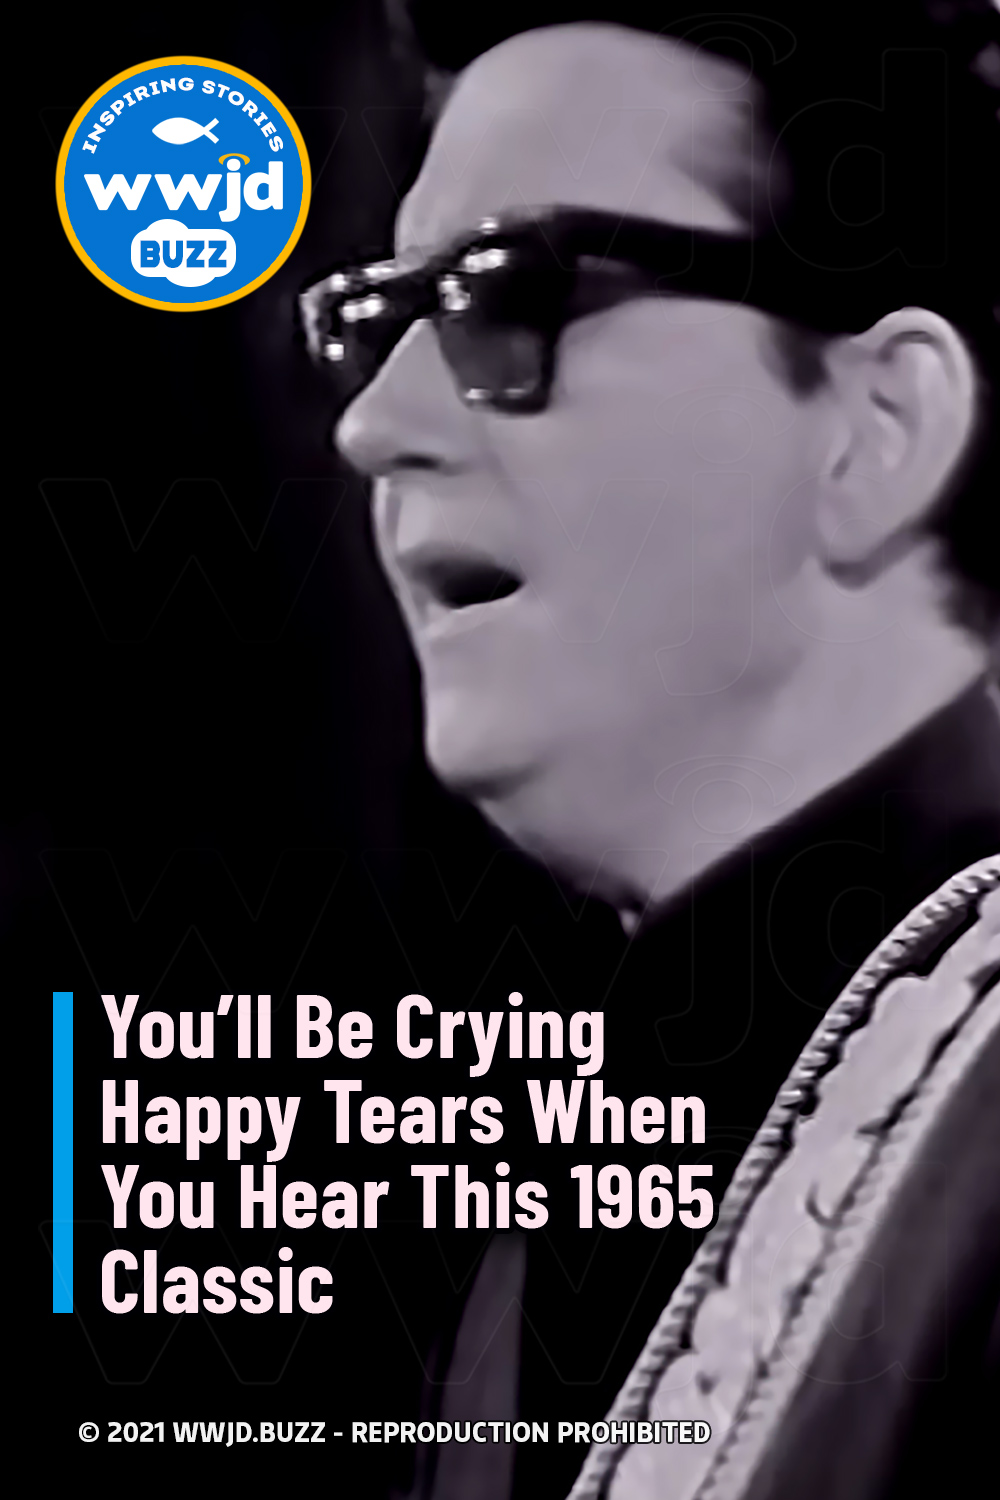 You’ll Be Crying Happy Tears When You Hear This 1965 Classic